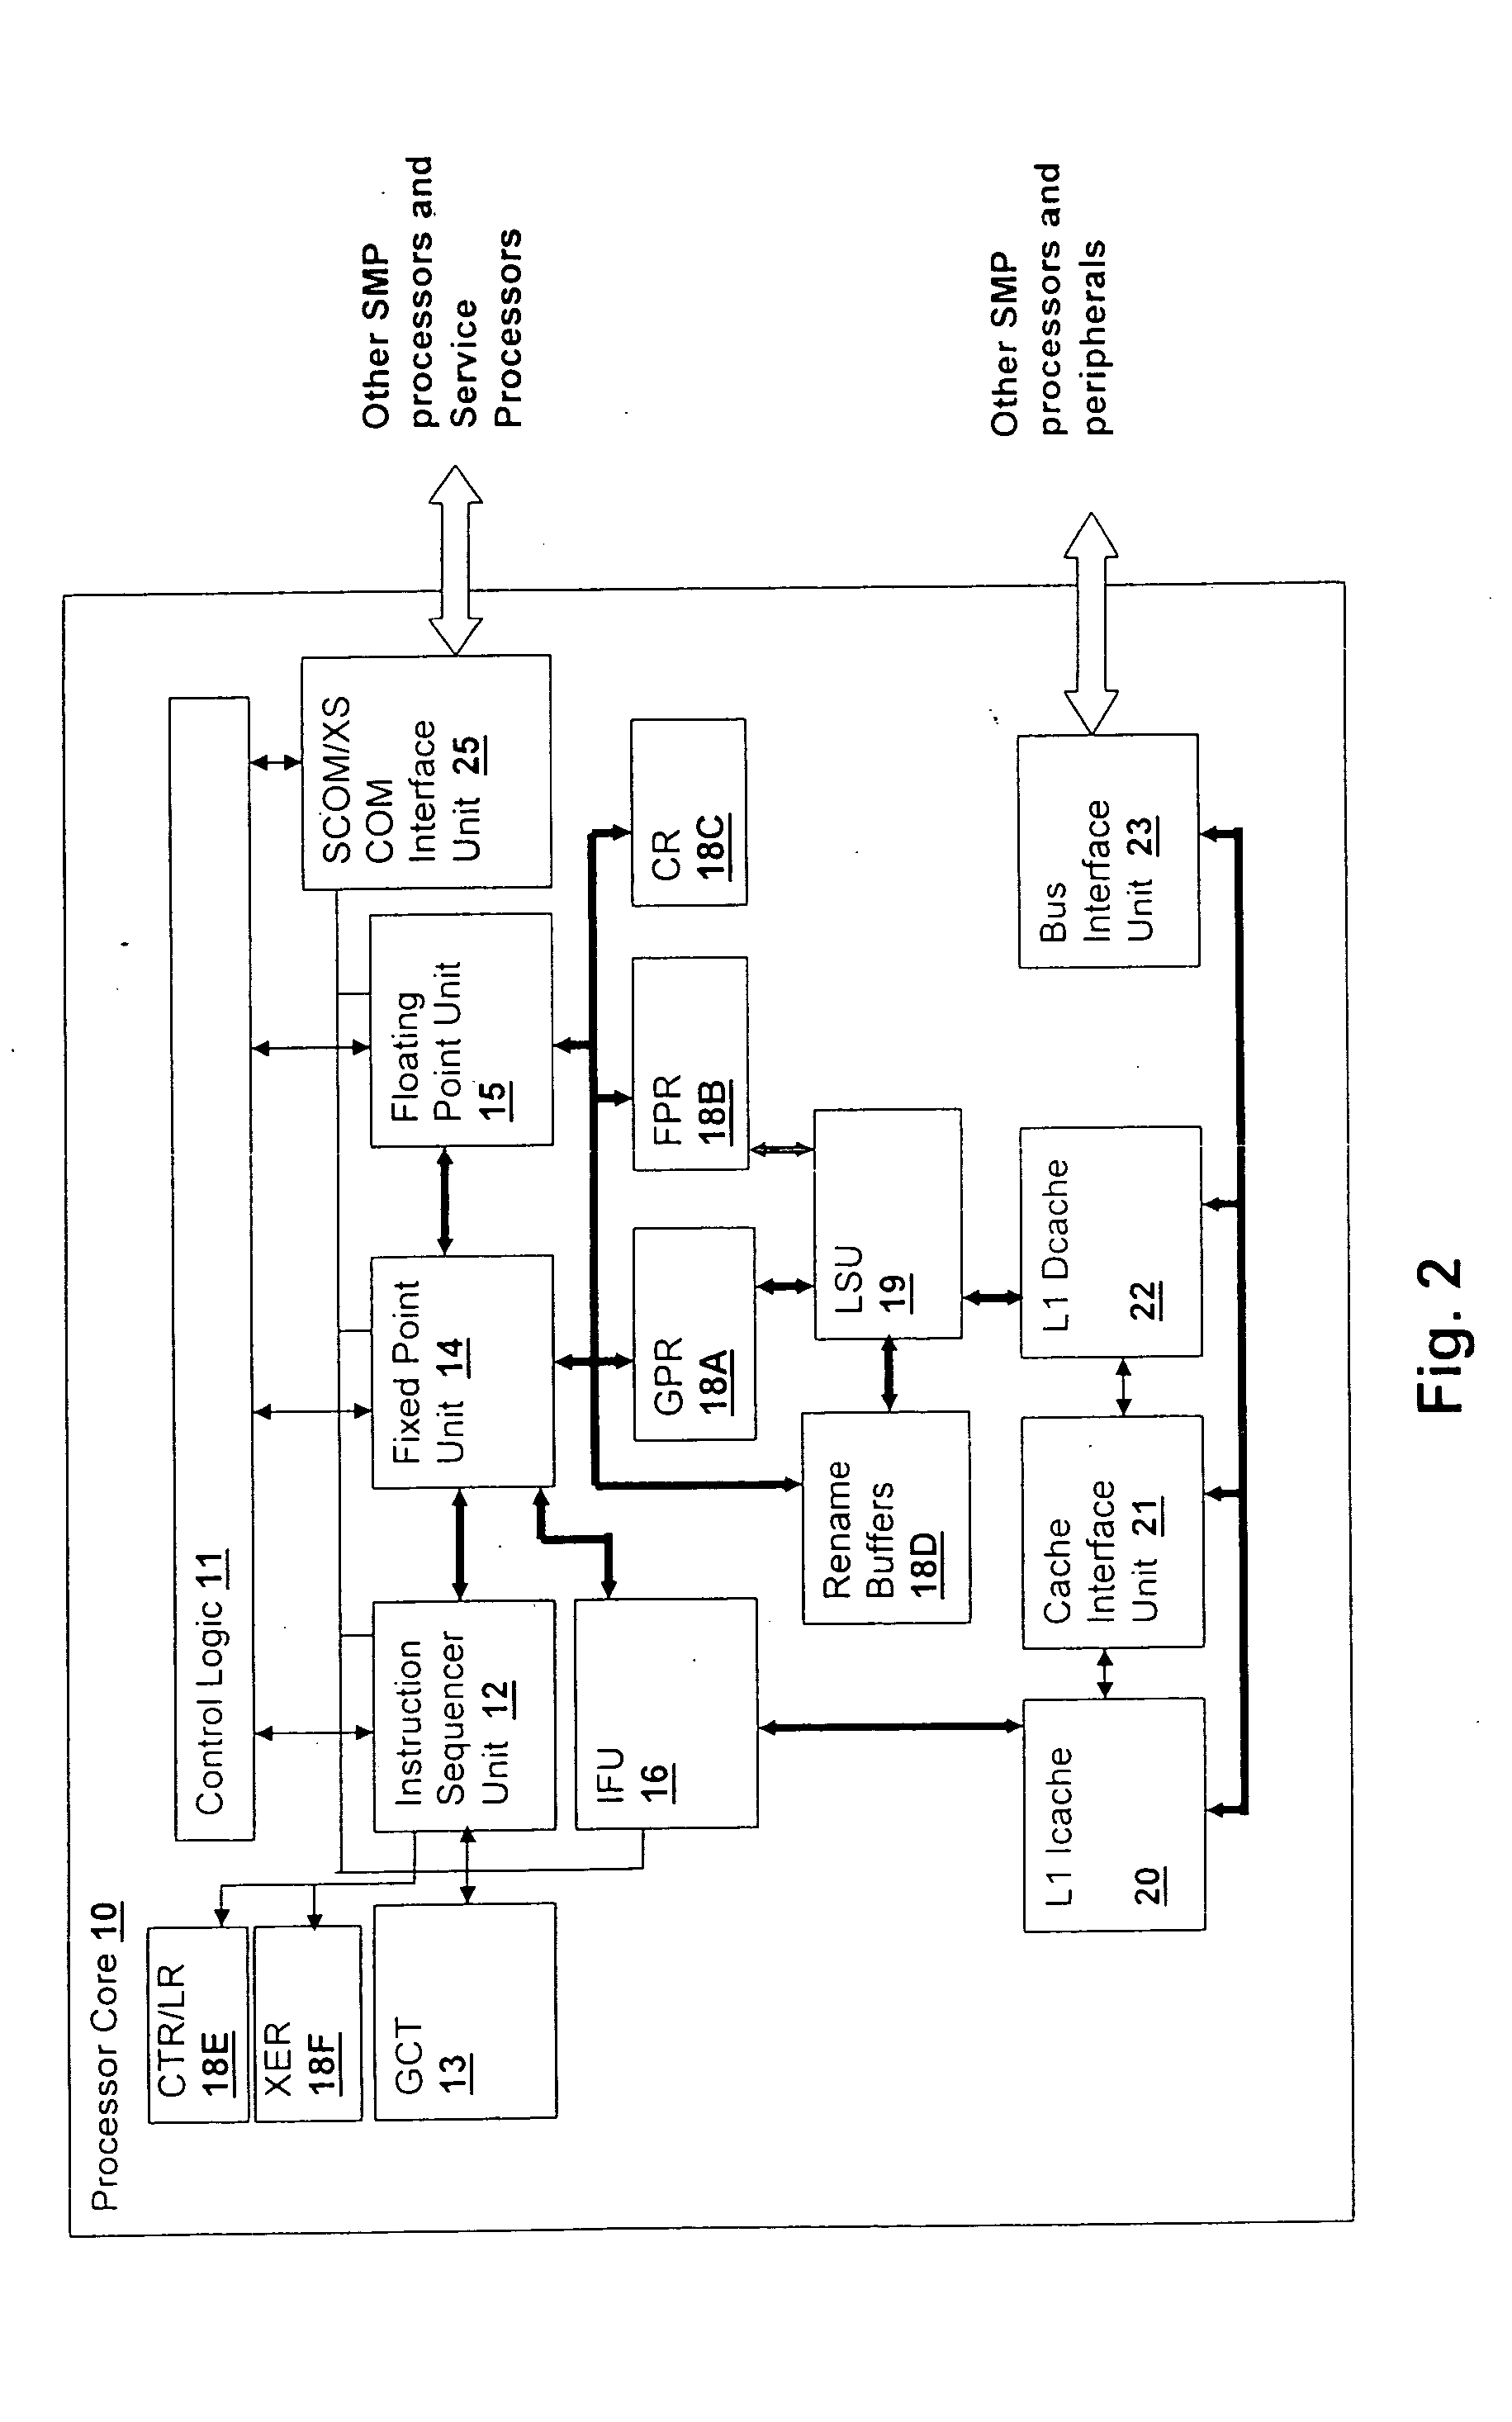 Method and logical apparatus for managing thread execution in a simultaneous multi-threaded (SMT) processor